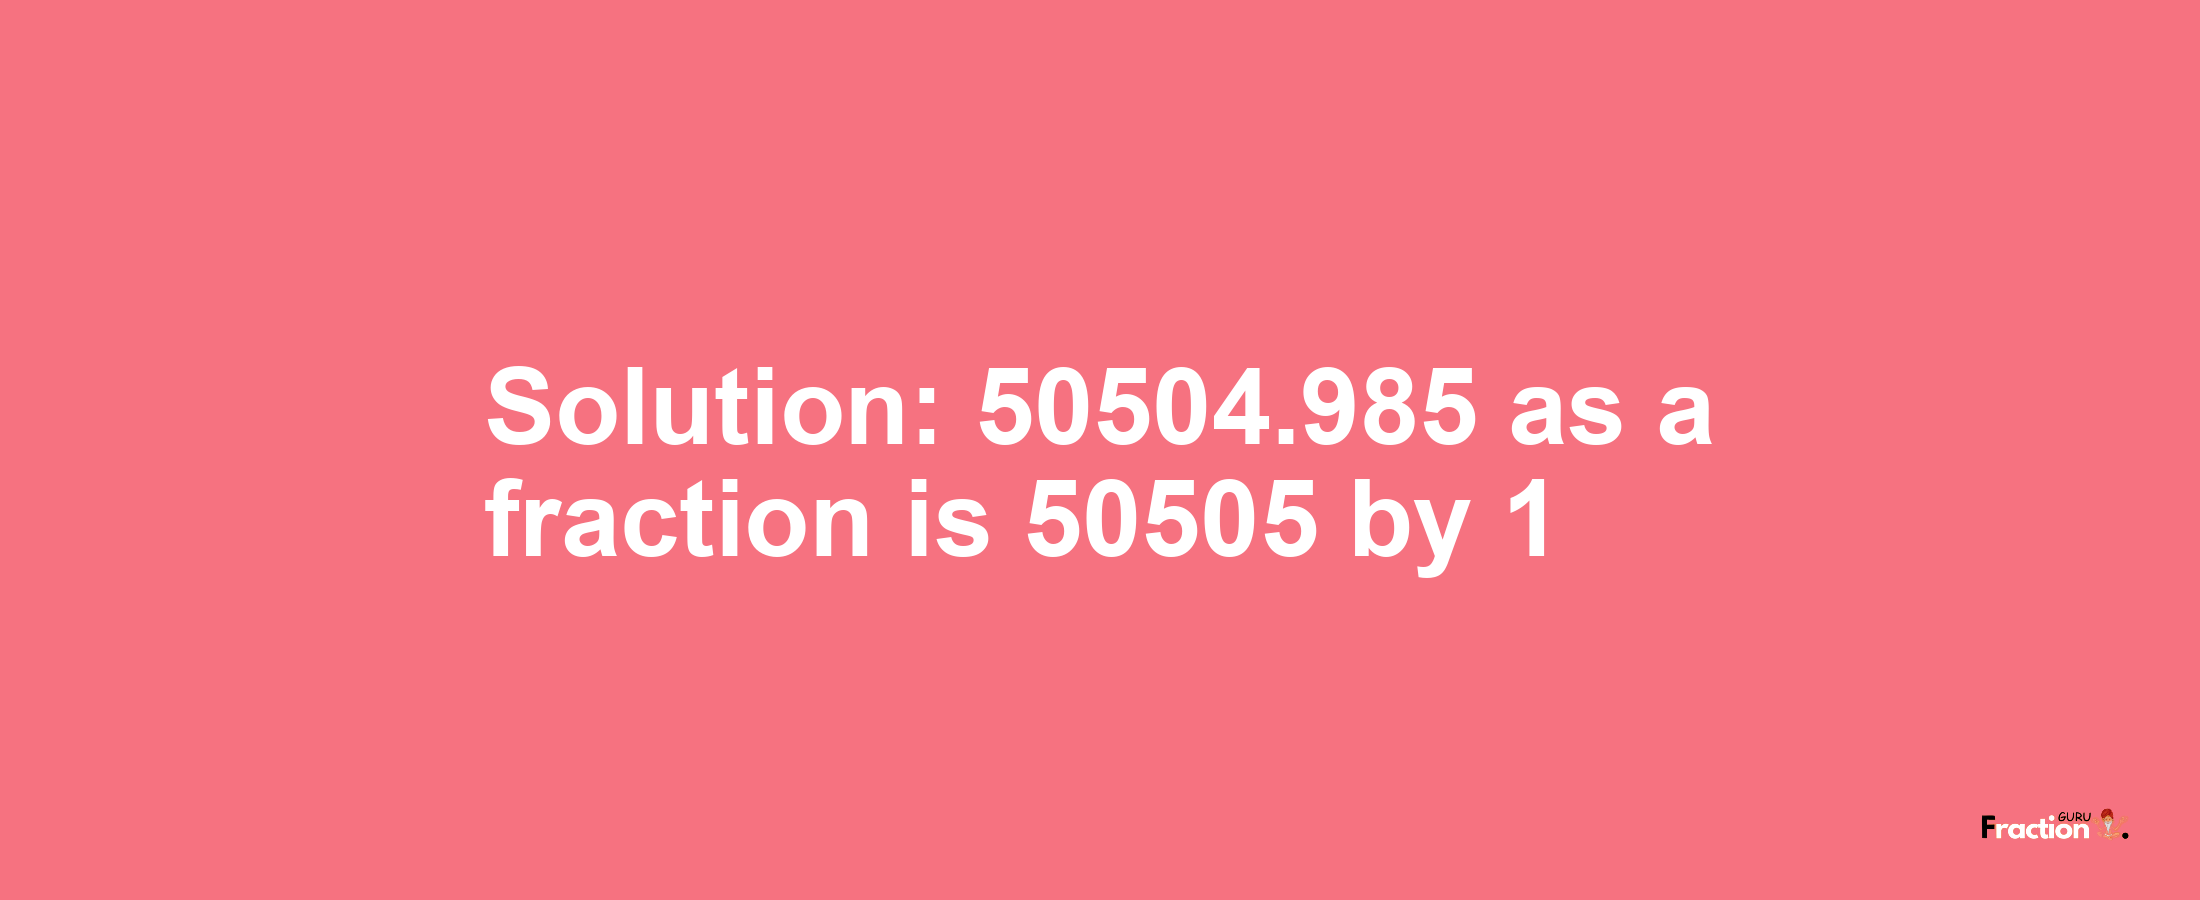 Solution:50504.985 as a fraction is 50505/1